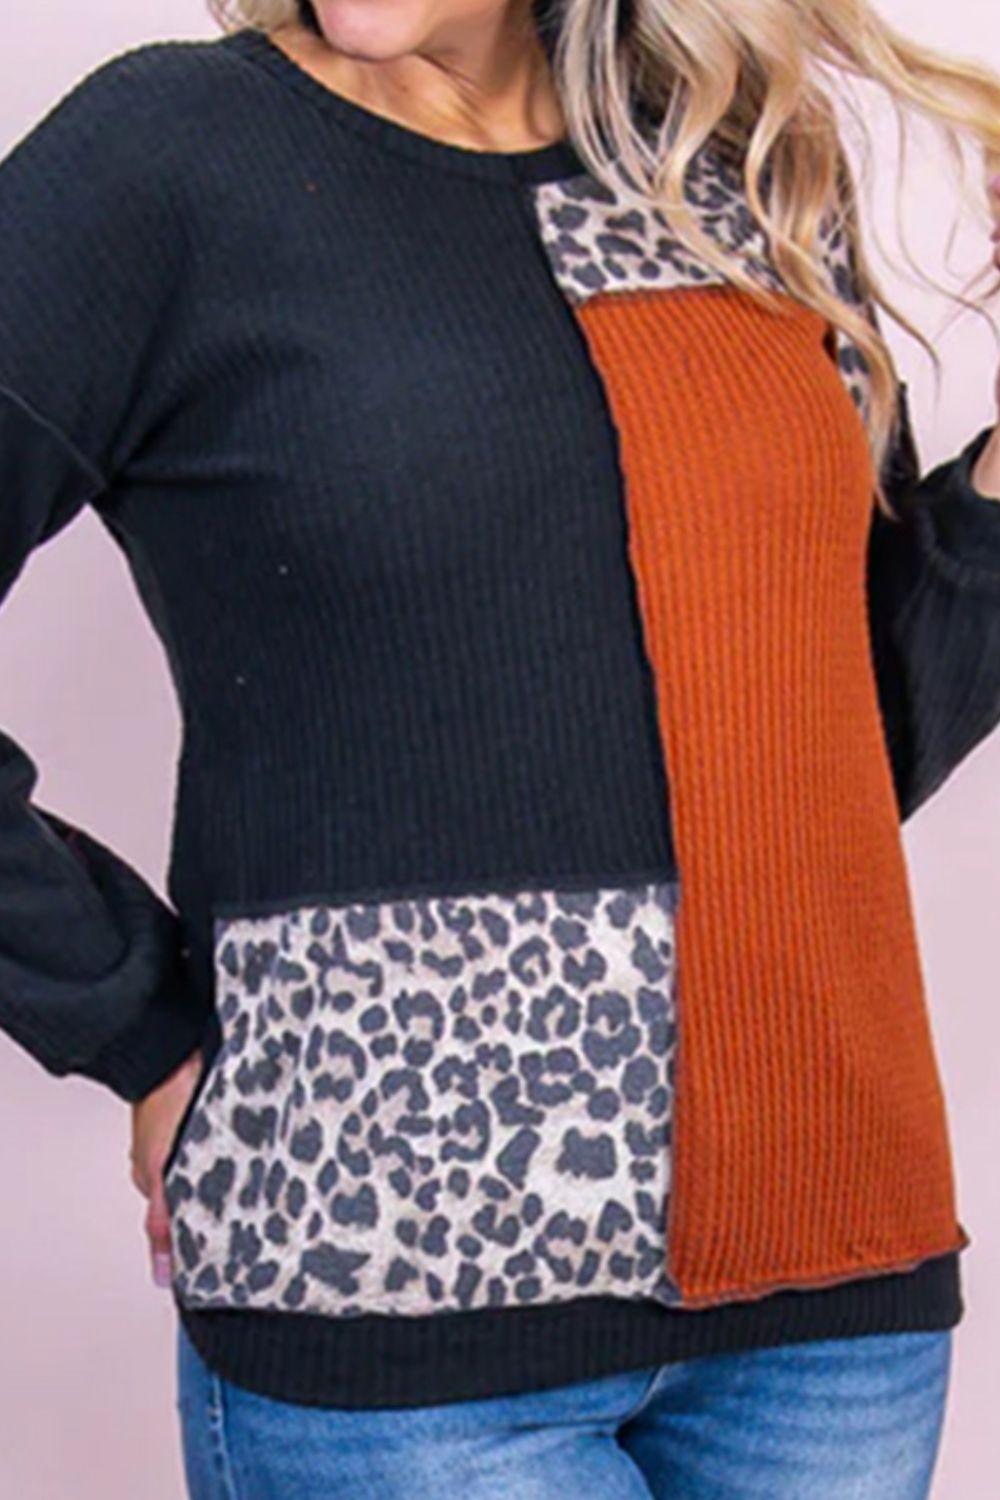 a woman wearing a black and orange sweater